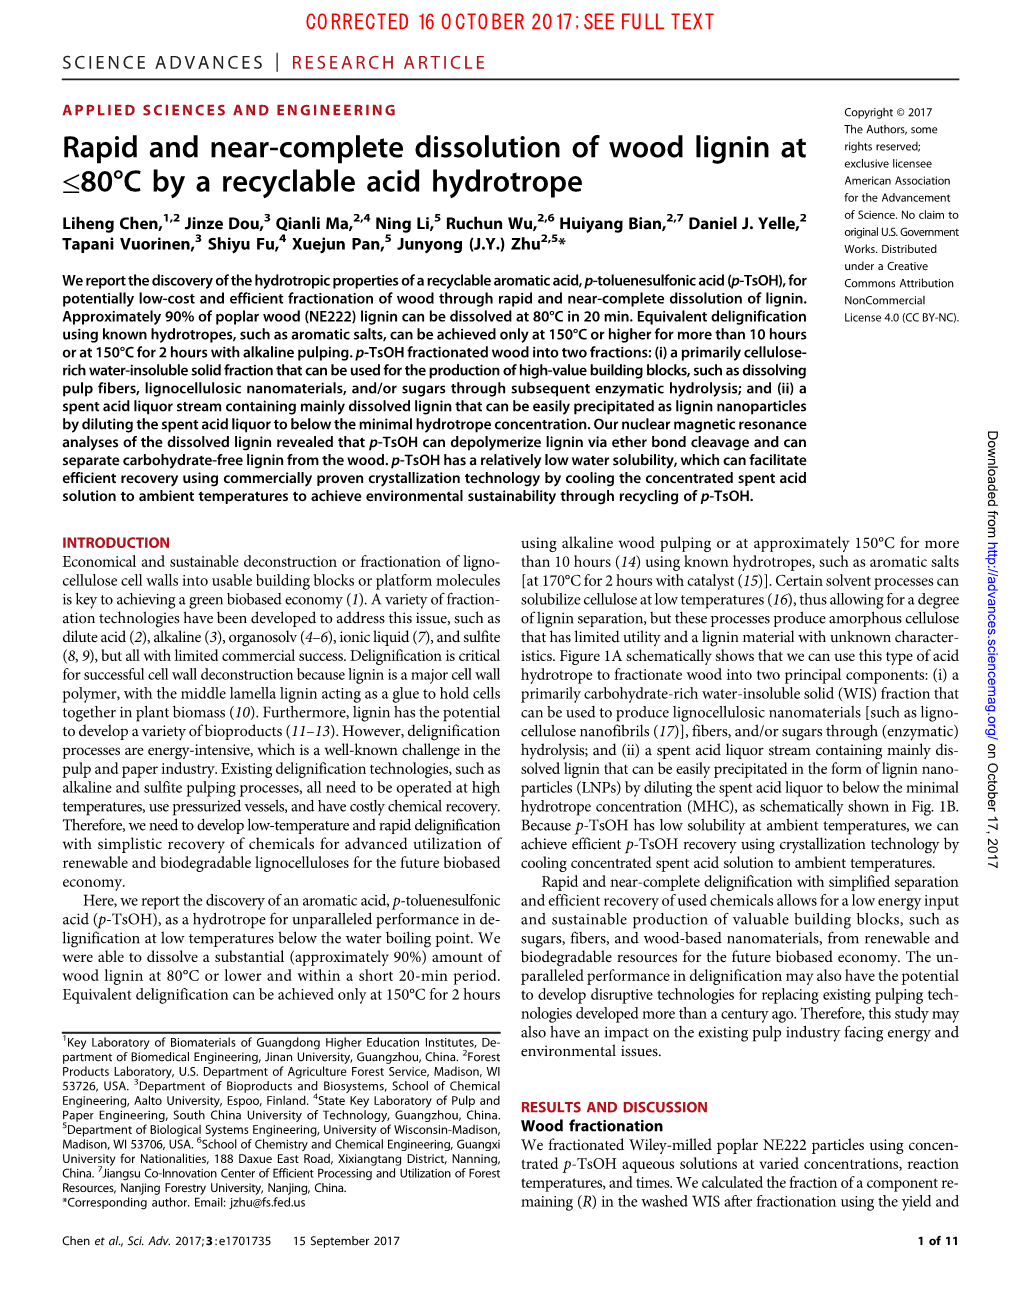 Rapid and Near-Complete Dissolution of Wood Lignin at ≤80°C by a Recyclable Acid Study